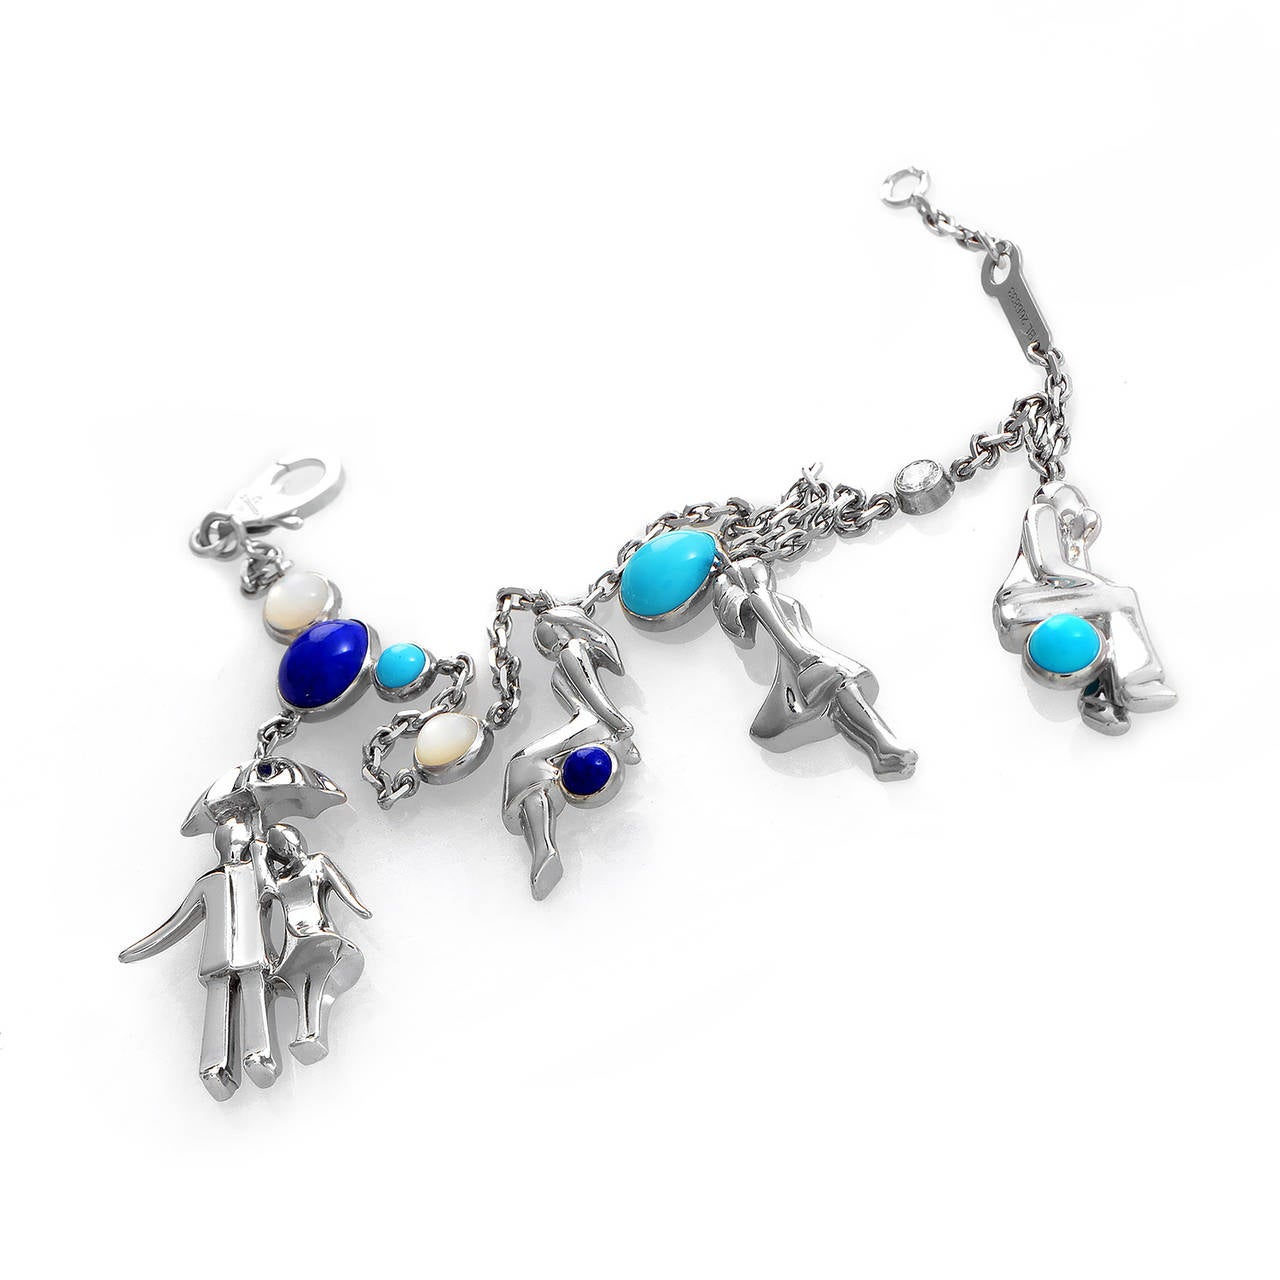 This fantastic charm bracelet from Van Cleef is finely crafted to exude a subtle air of femininity and luxury. The bracelet is made of 18K white gold and features adorable charms accented with lapis, turquoise, and mother of pearl.